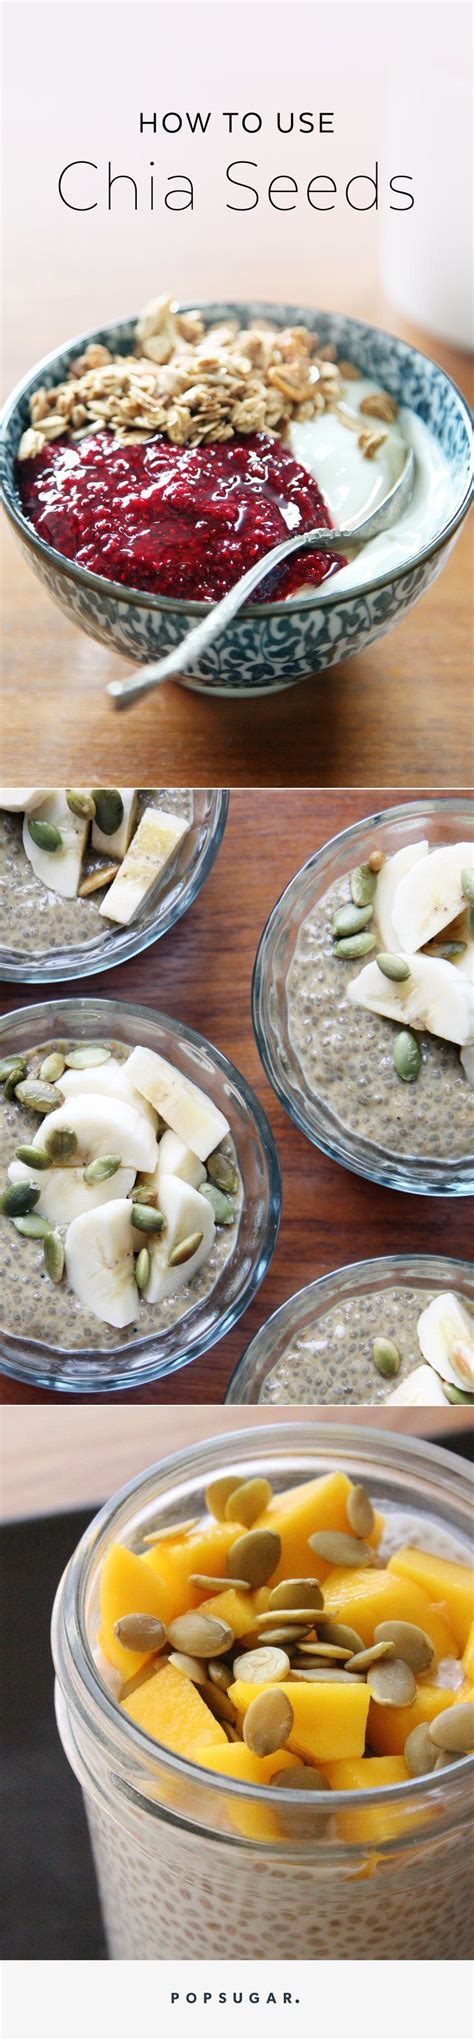 9 Creative And Simple Ways To Add Chia Seeds Into Your Everyday Diet Clean Eating Recipes